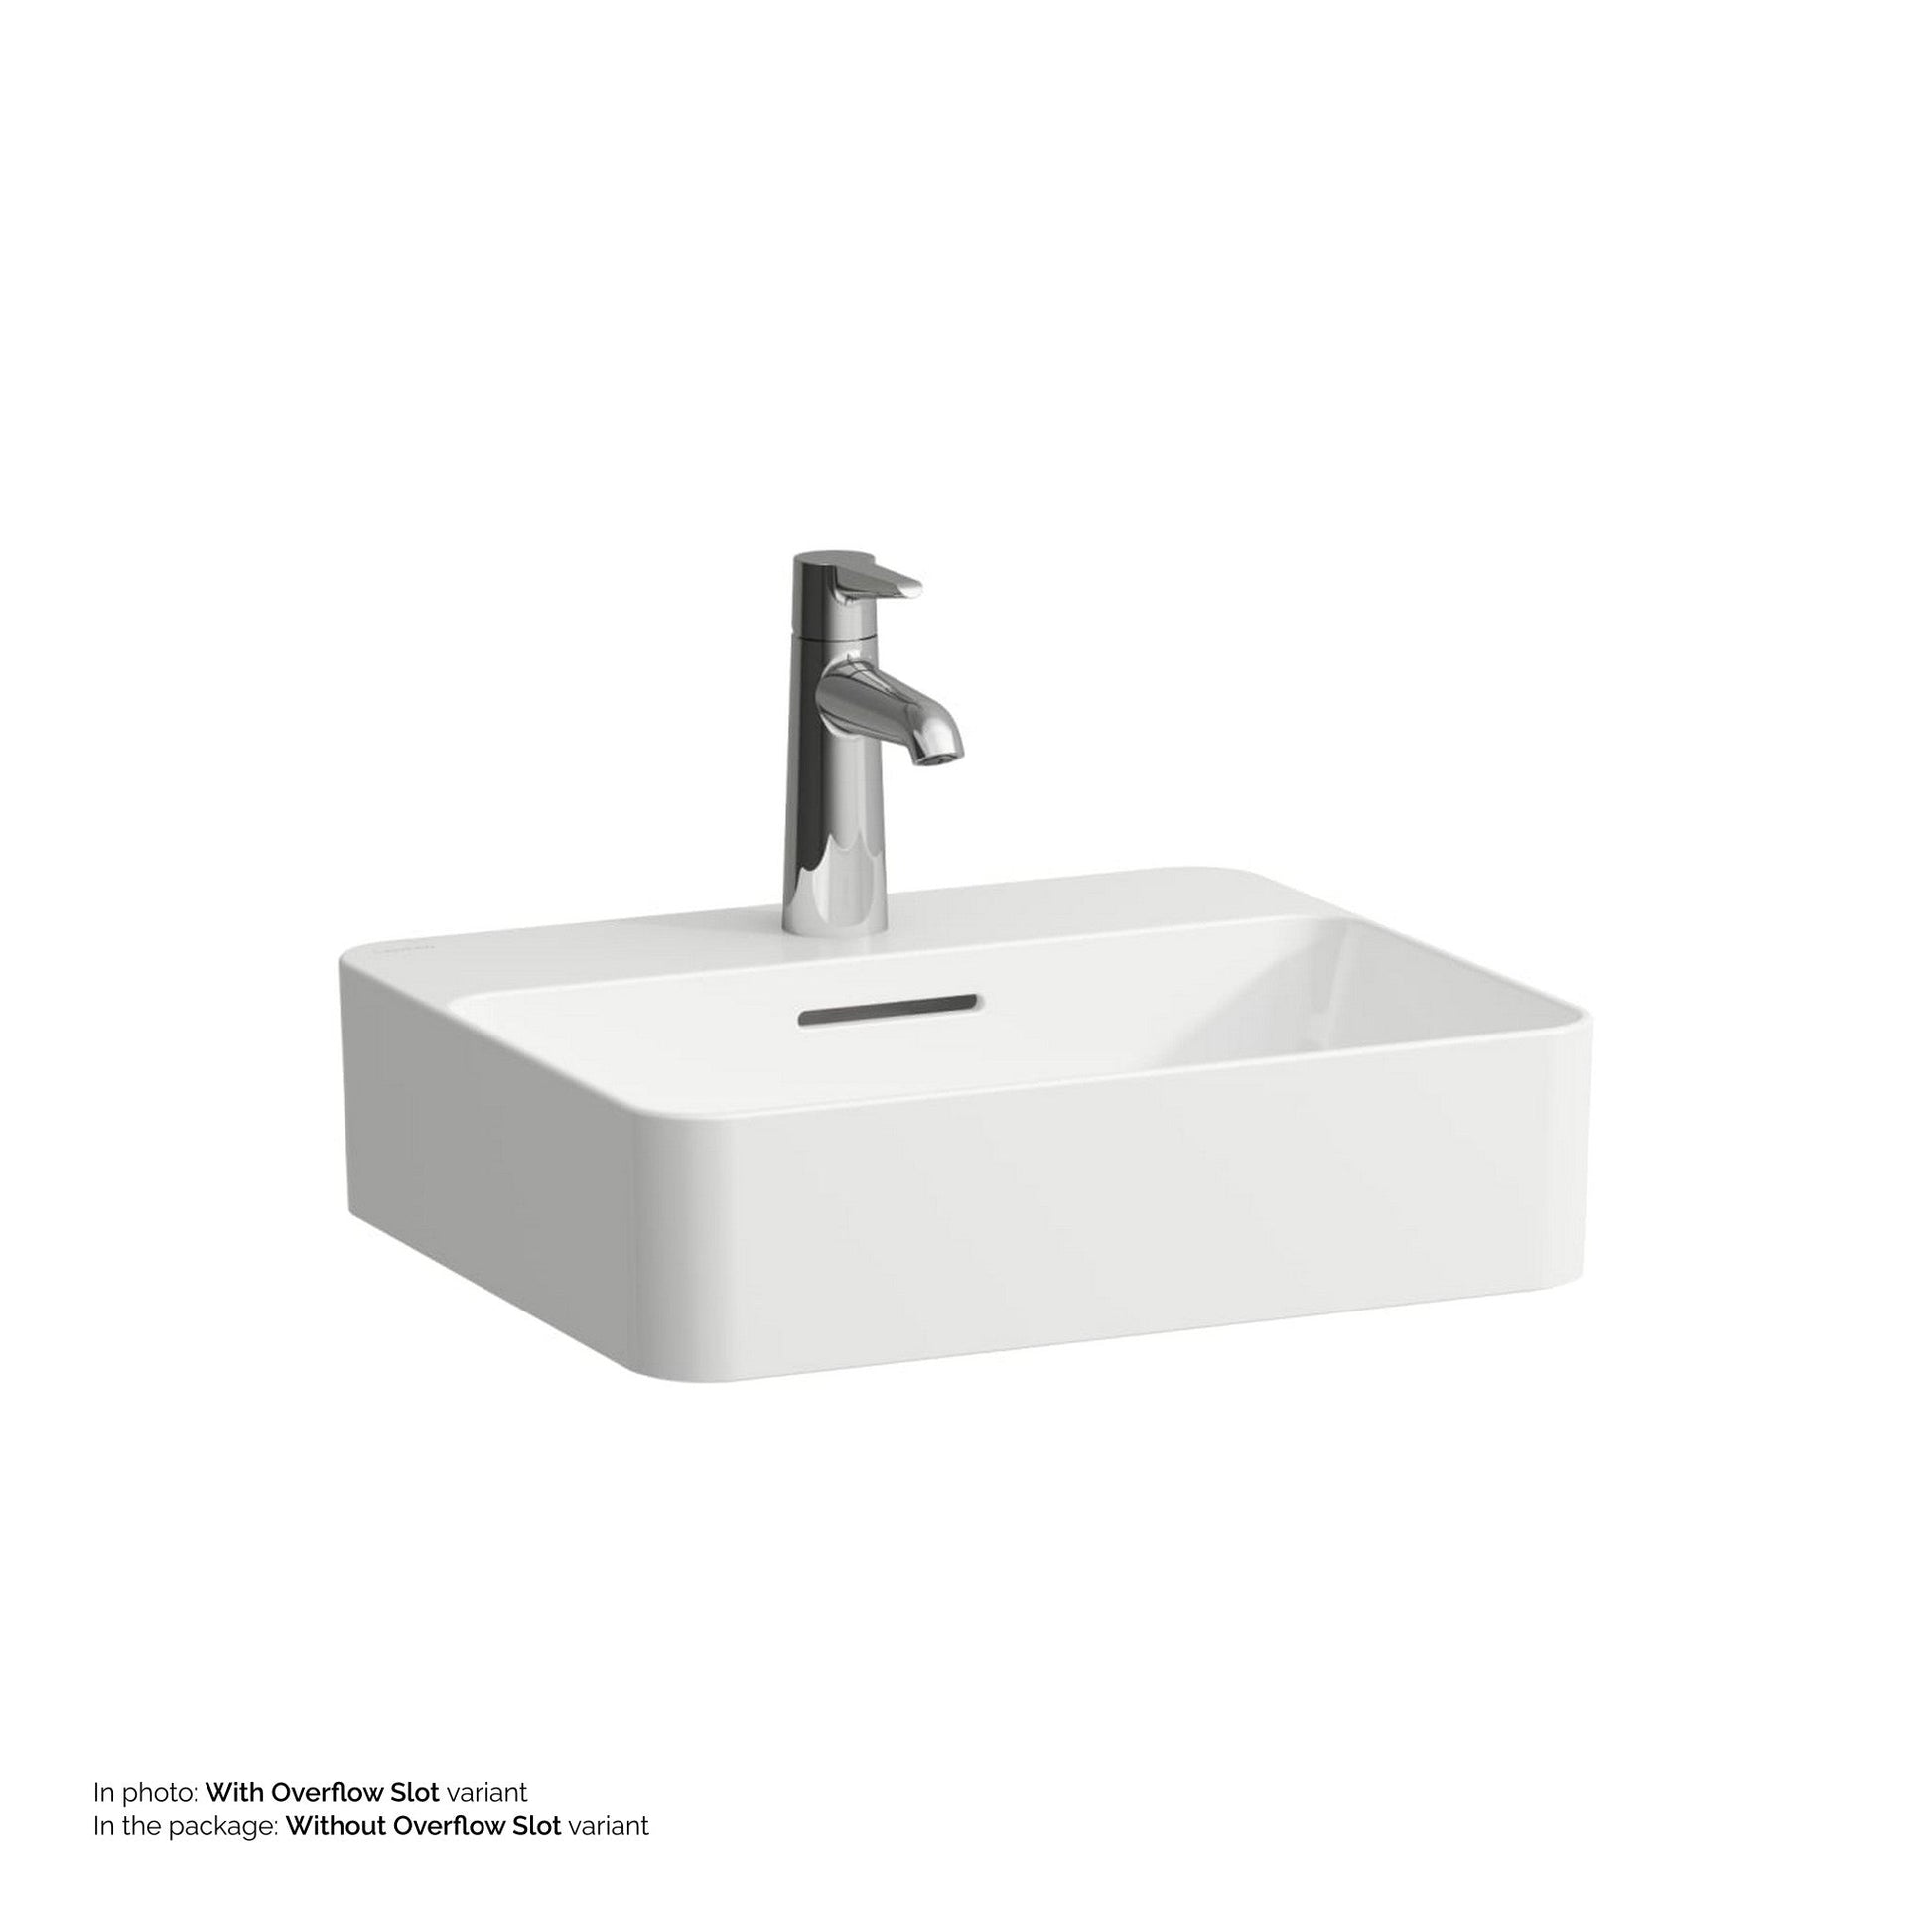 Laufen Val 18" Rectangular White Countertop Bathroom Sink With Faucet Hole, Without Overflow Slot